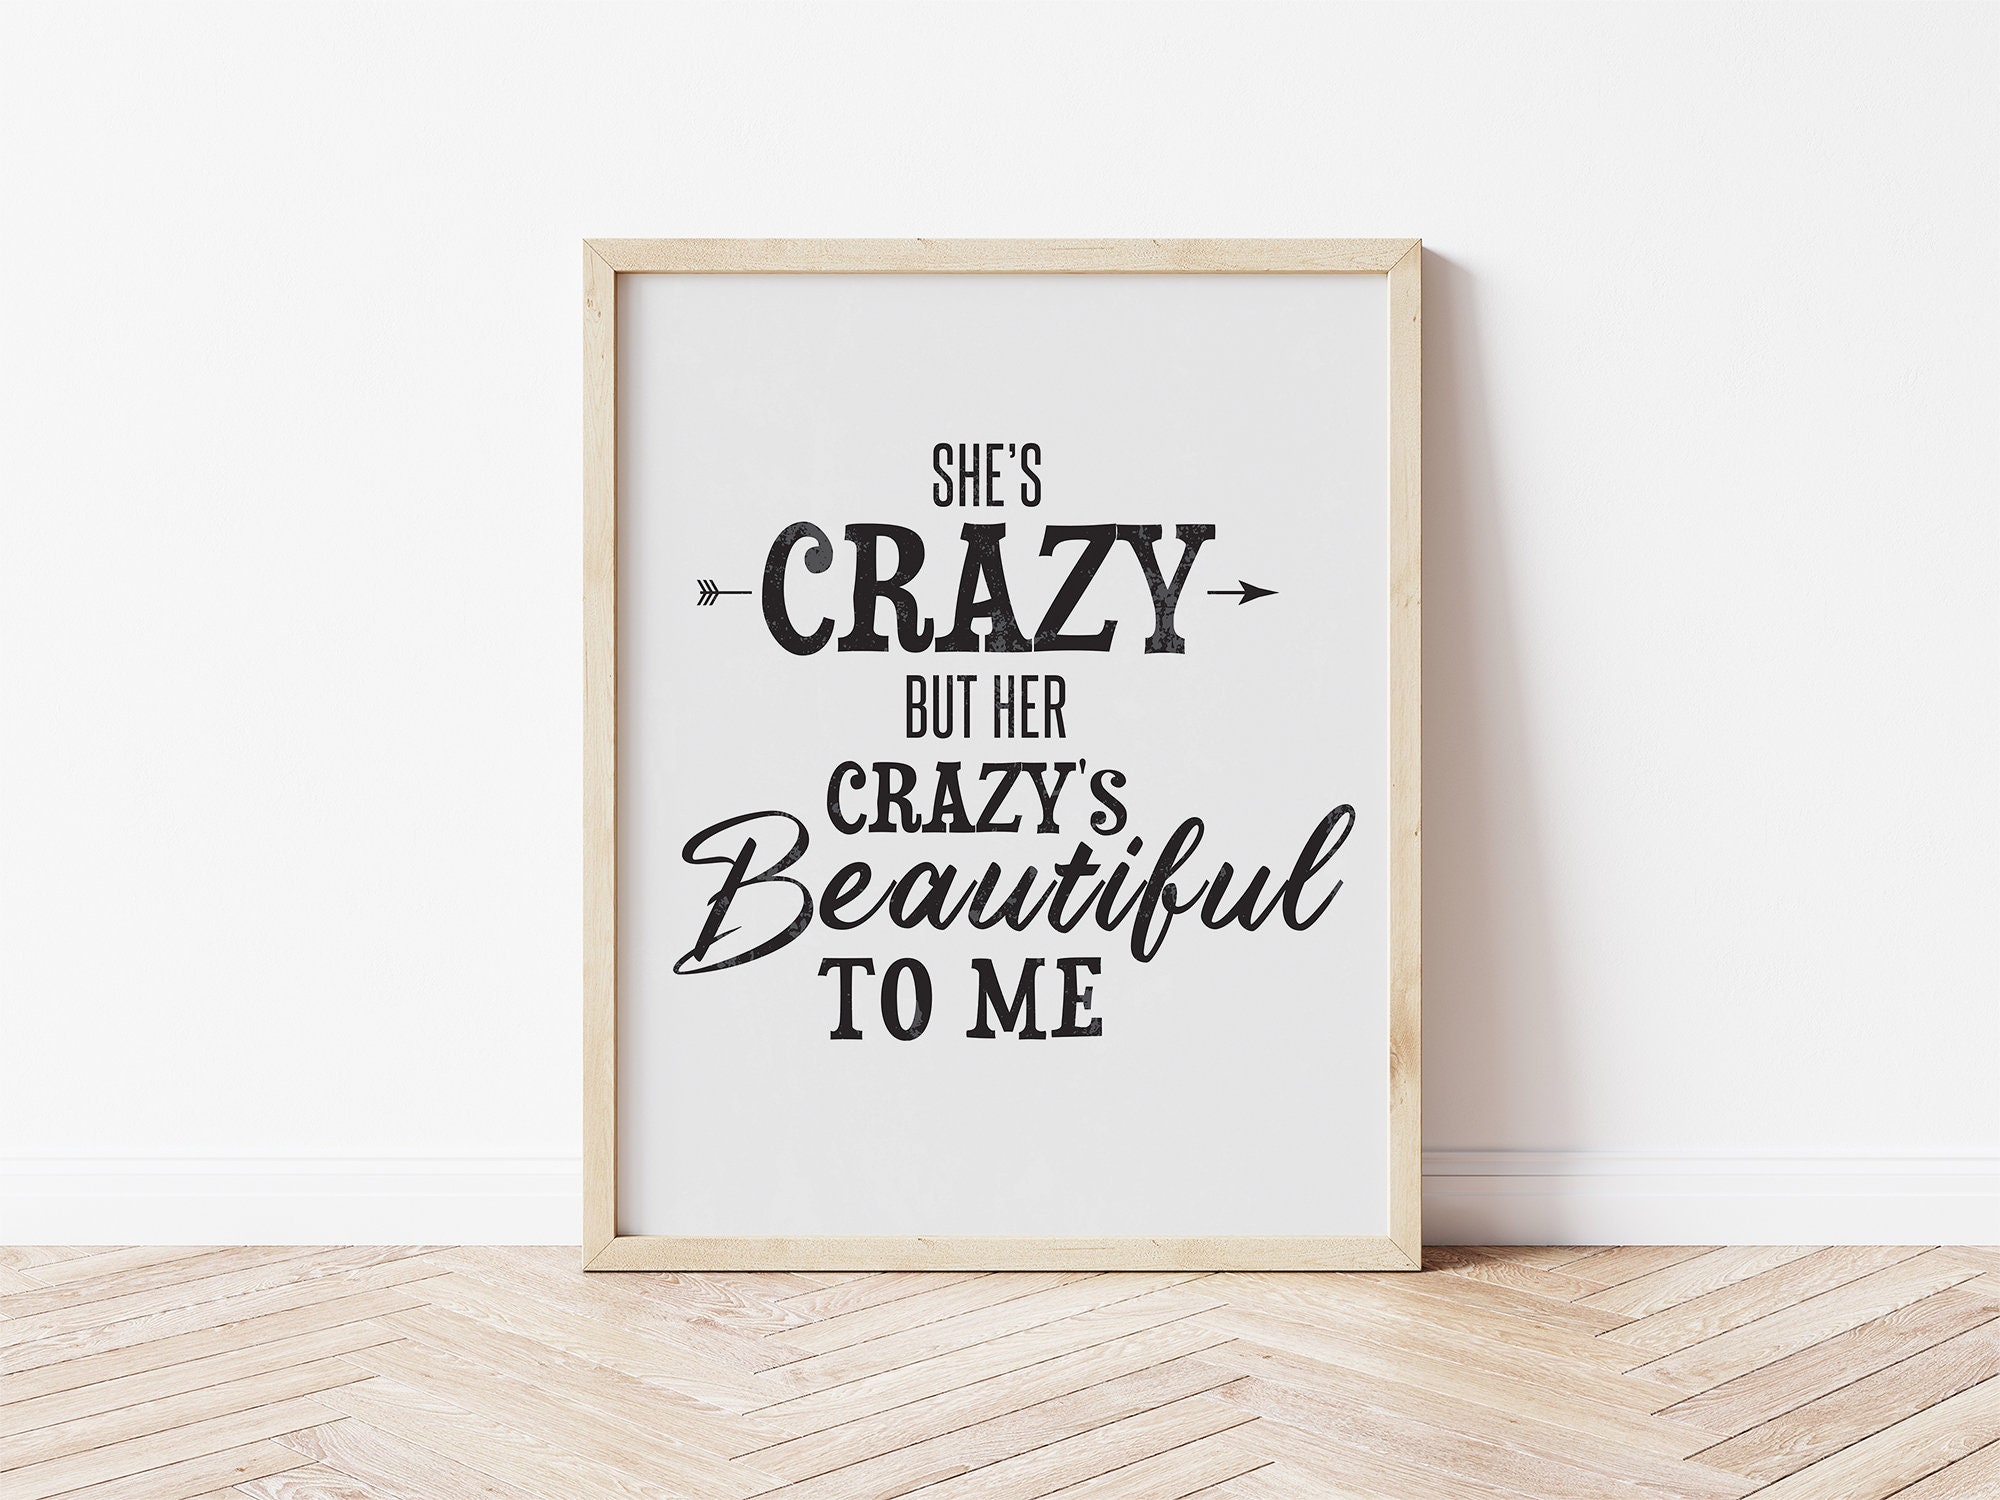 Beautiful Crazy Lyrics Poster for Sale by CrystalCrush